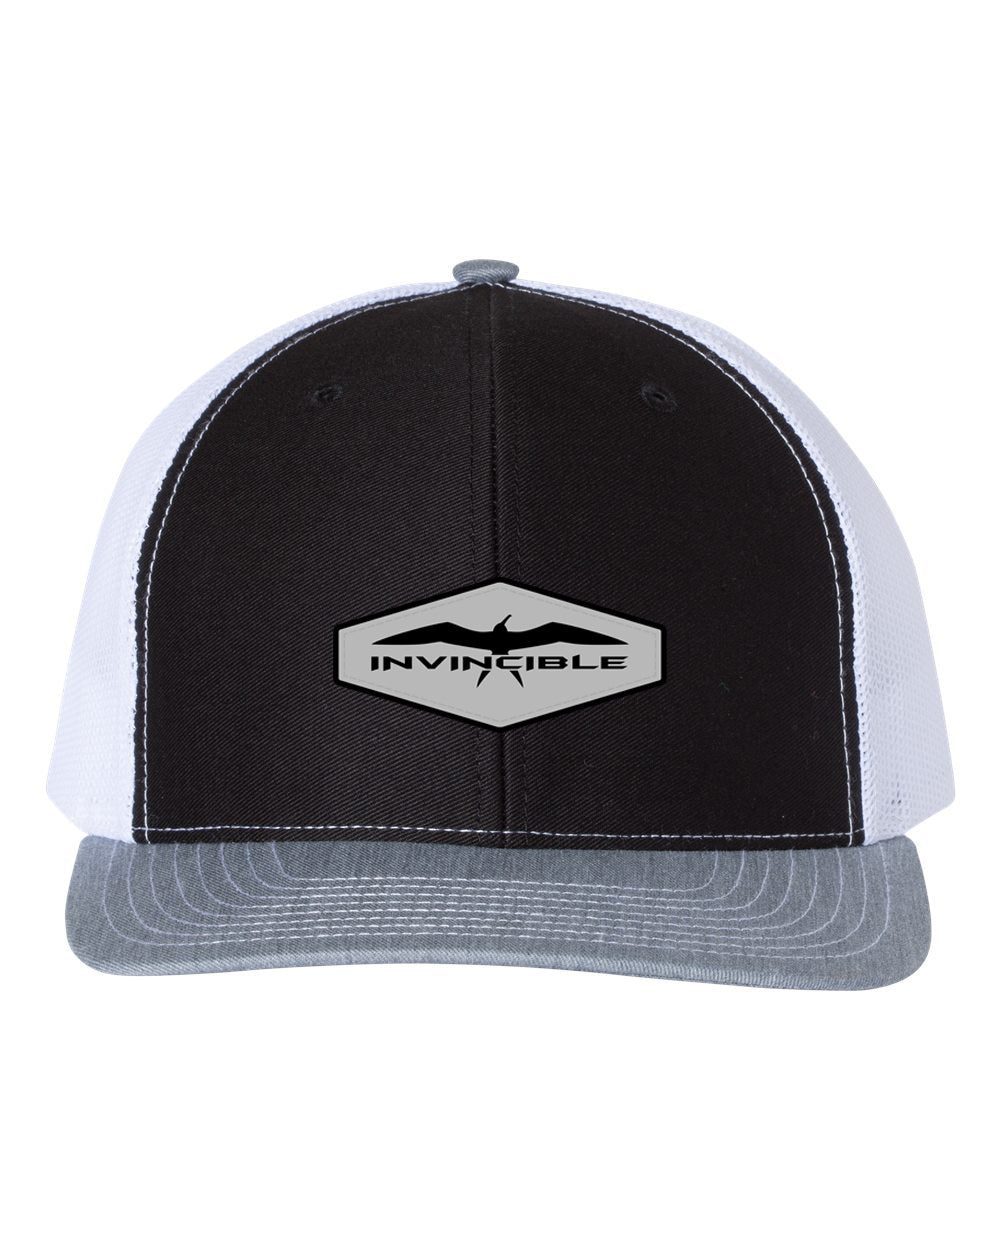 Invincible Signature Steel Black Leather Patch Black/White/Heather Grey Trucker Hat